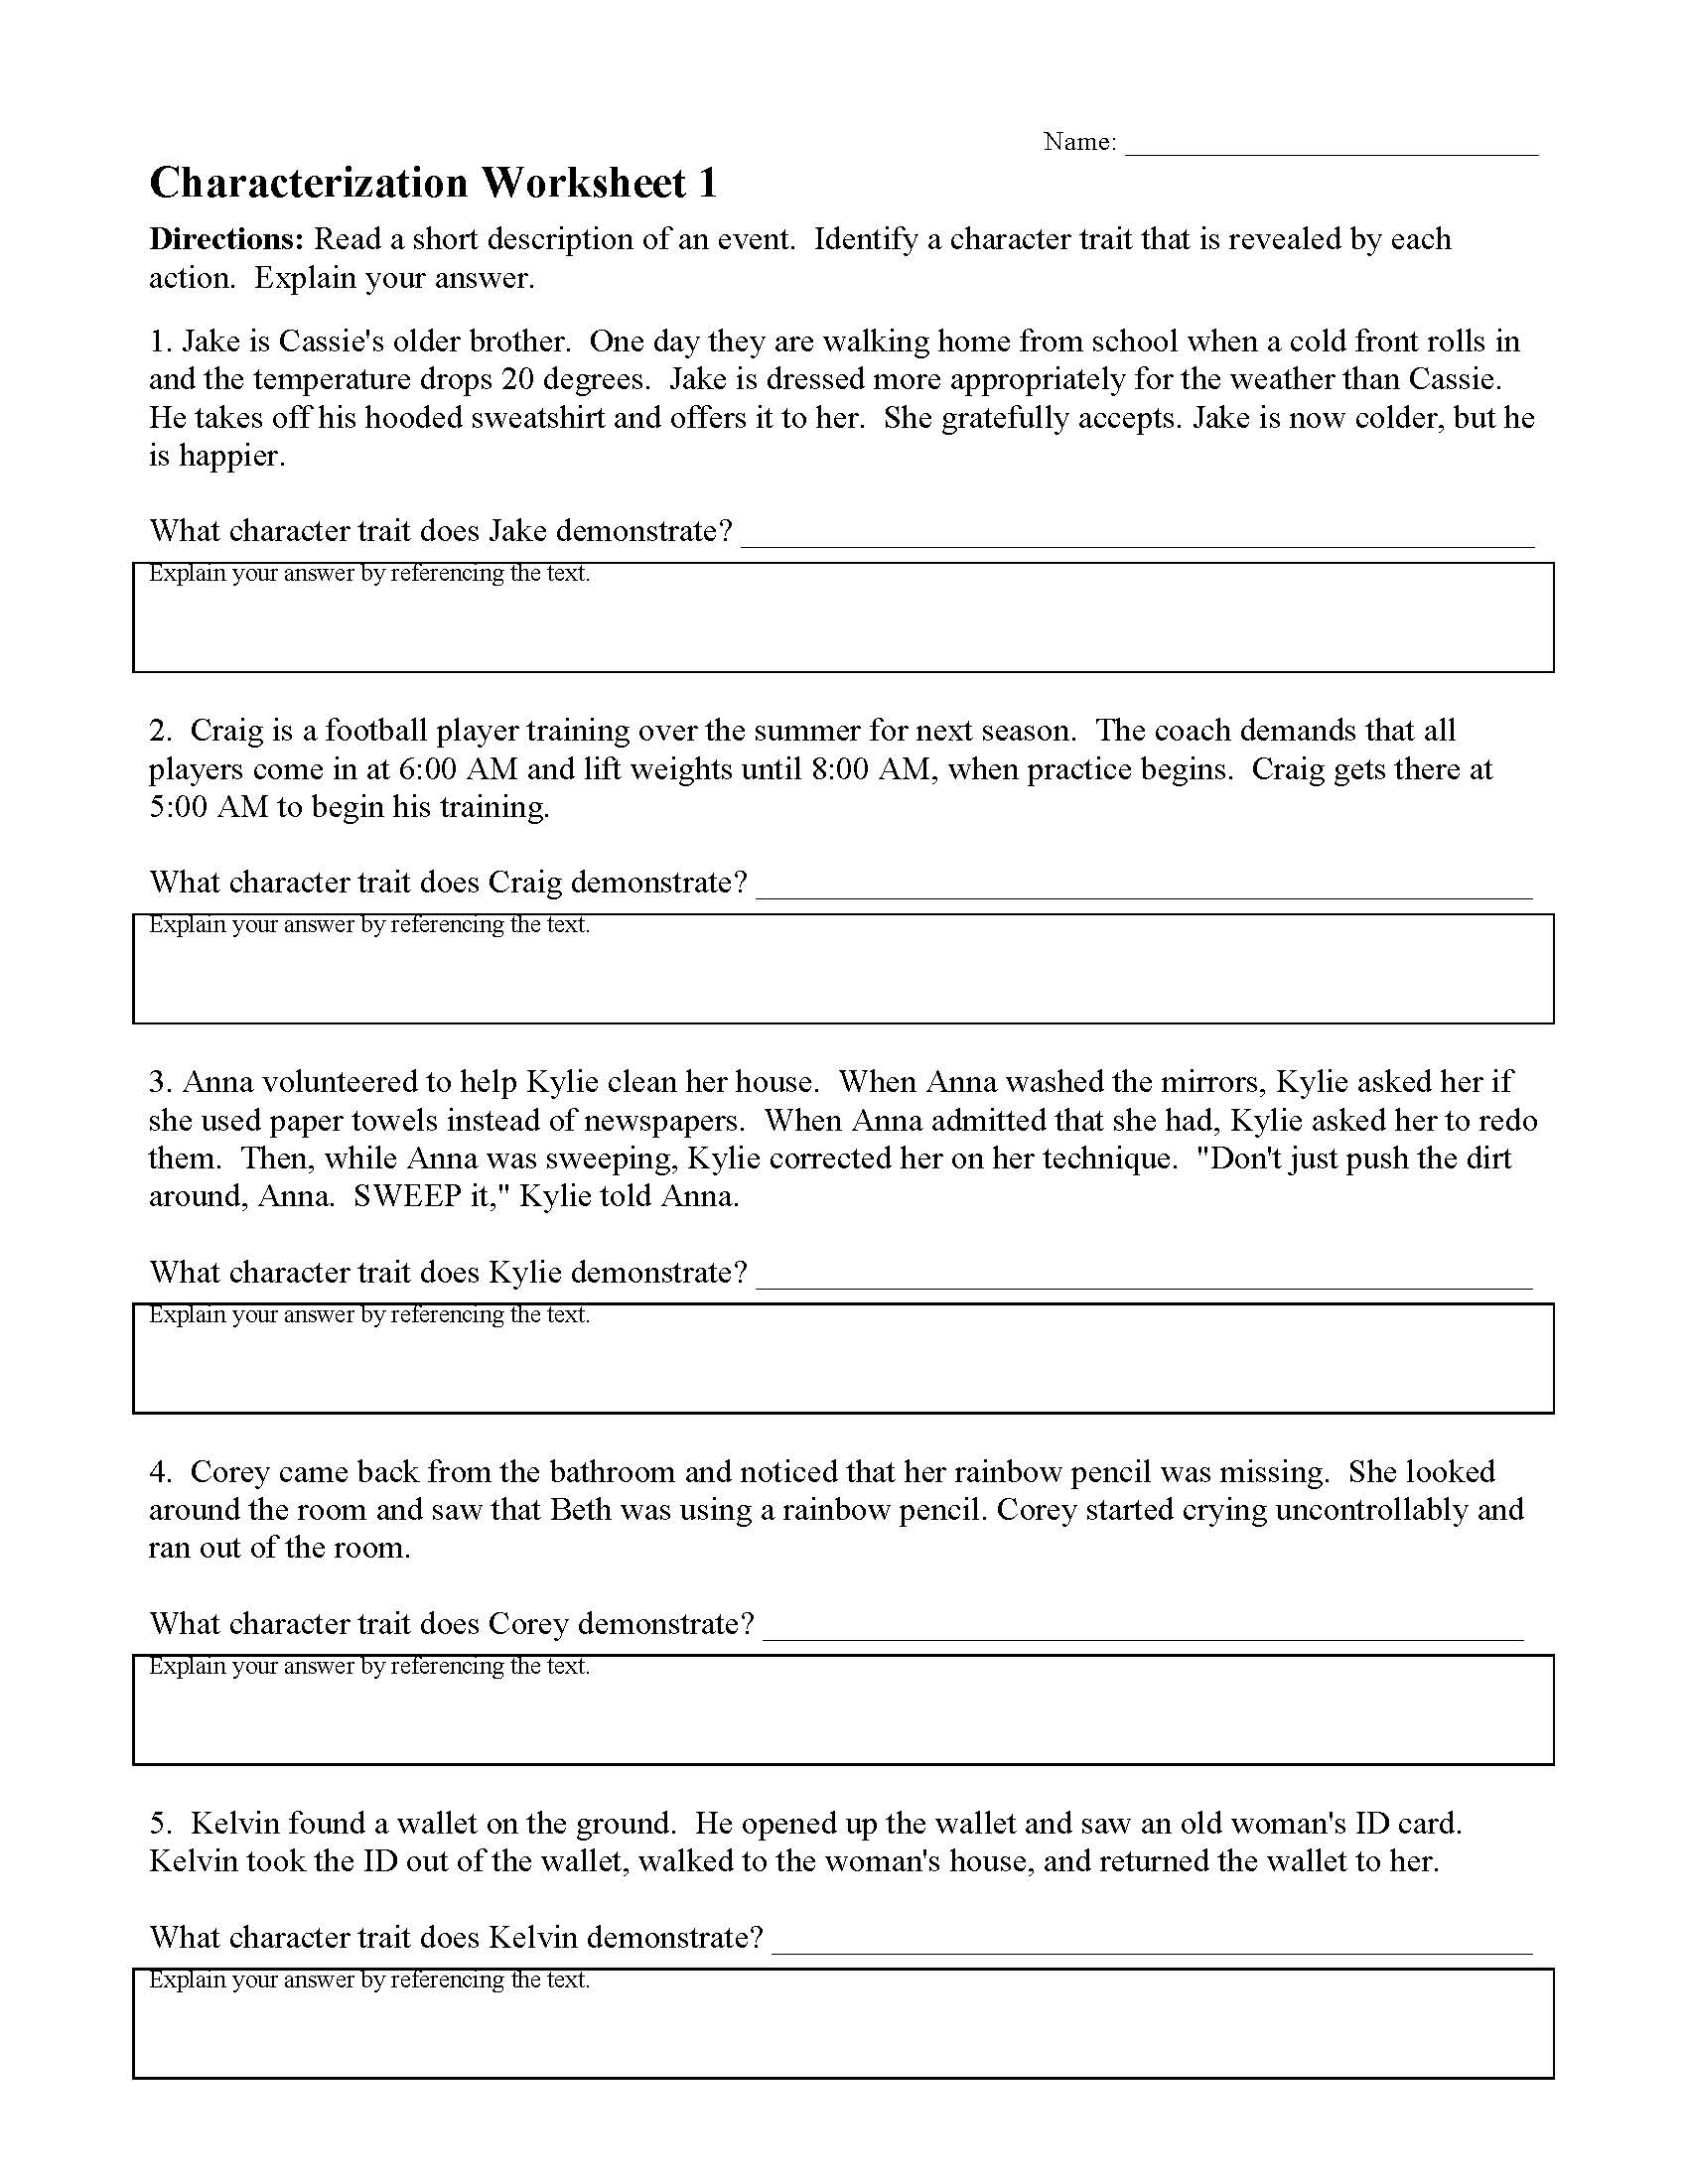 direct-and-indirect-characterization-worksheet